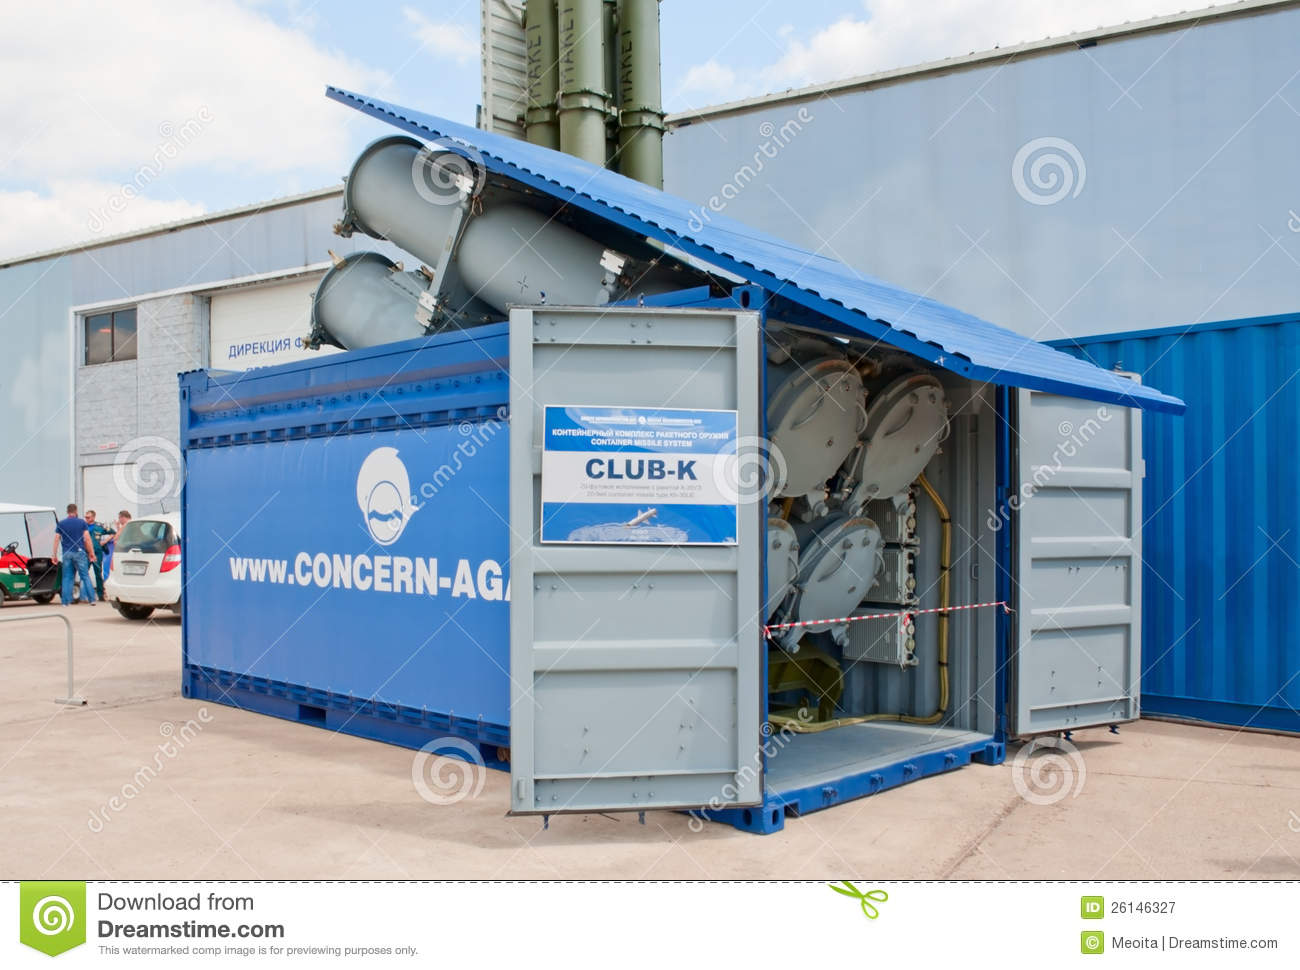 club-k-container-missile-system-26146327.jpg